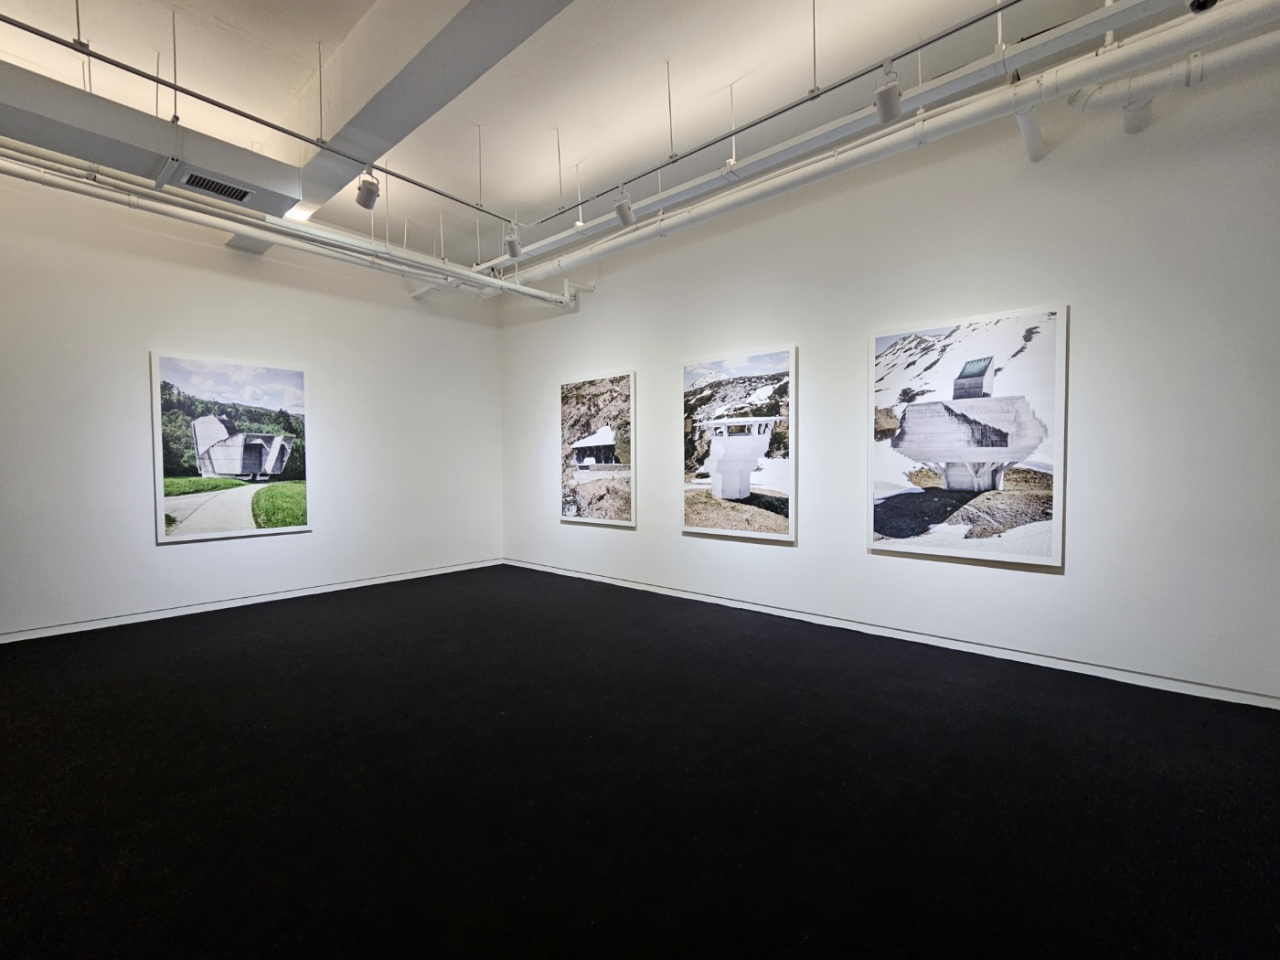 Photographs by Florian Amoser are on display at the exhibition 